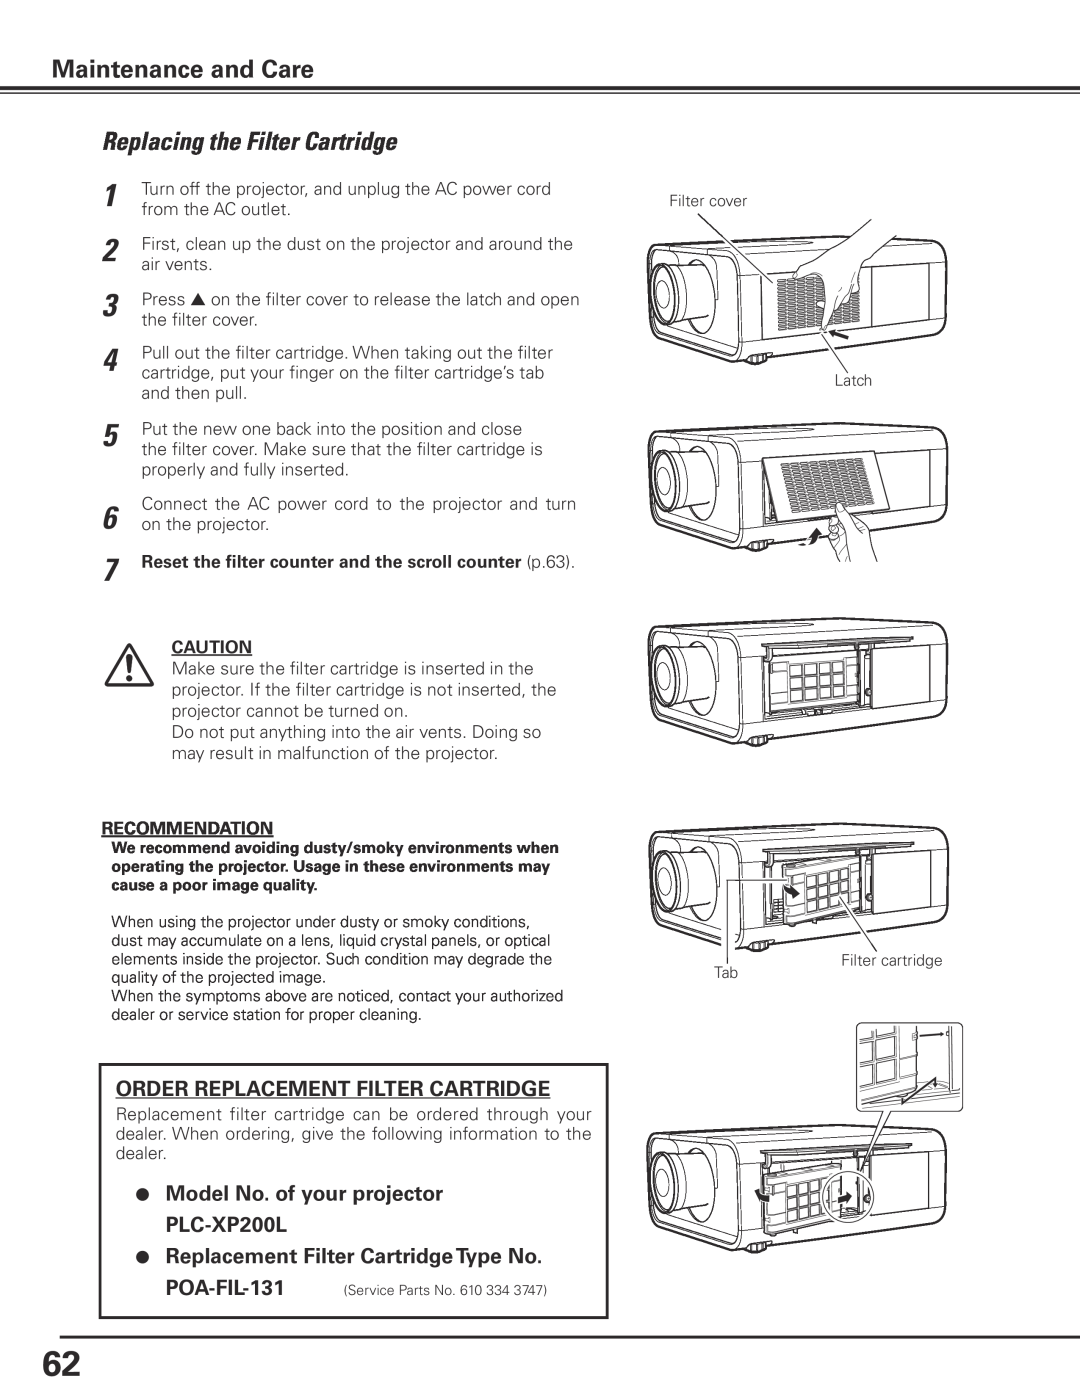 Sanyo PLC-XP200L Turn off the projector, and unplug the AC power cord, from the AC outlet, air vents, the filter cover 